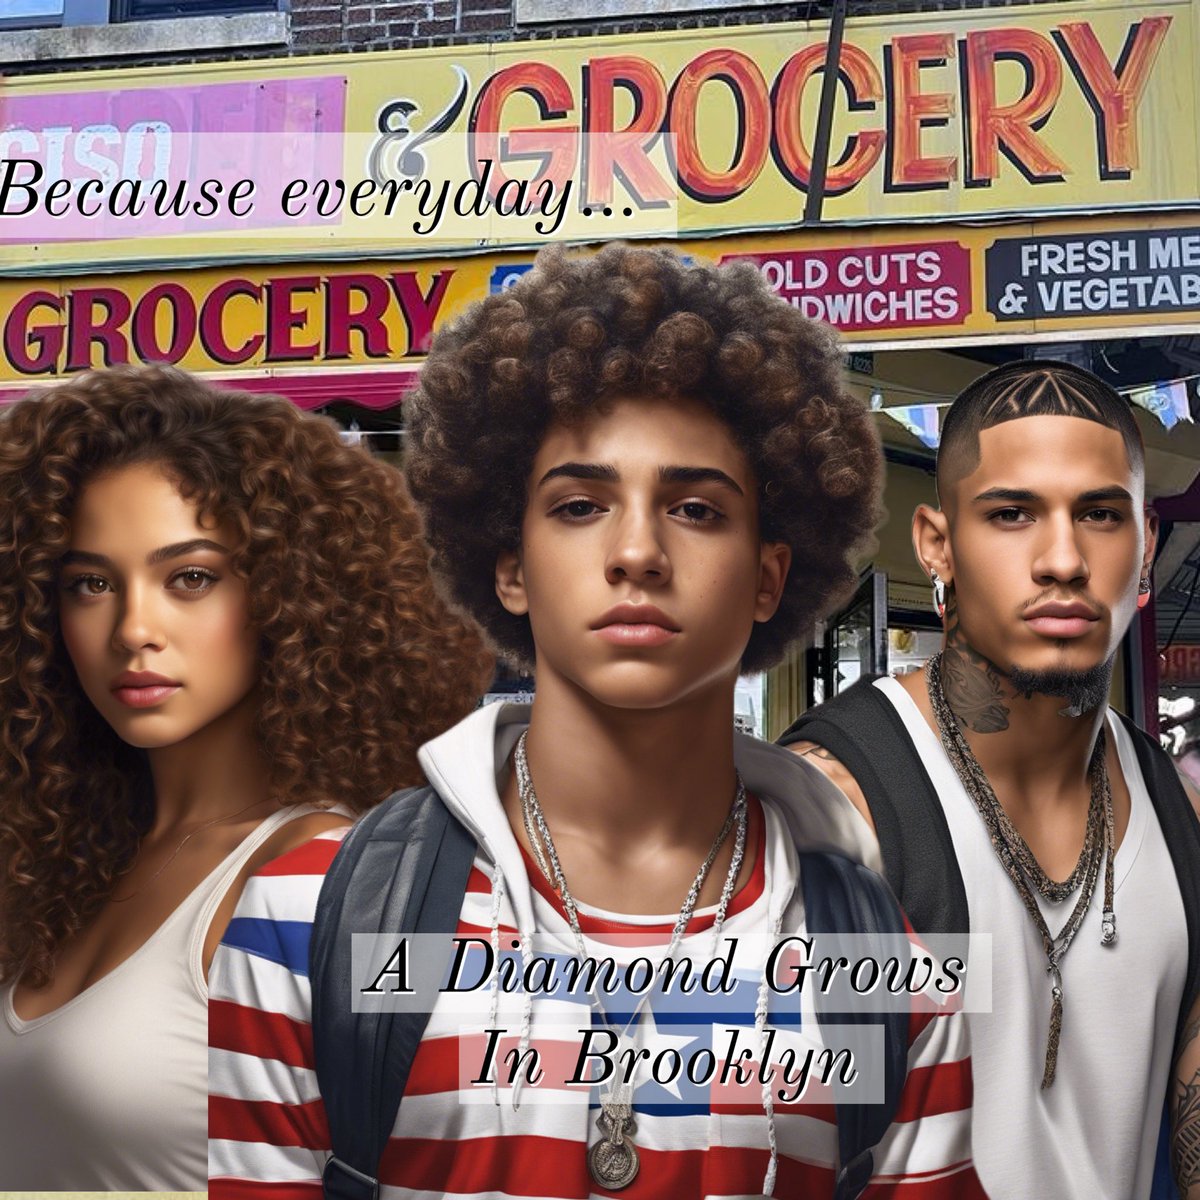 📚✨ Seeking lit agents/publishers for my YA novel, A Diamond Grows in Brooklyn! 🌆🎨 Powerful story of art, identity, and social justice. Perfect for fans of The Hate U Give & With the Fire on High. 📖✍️ #boricuaauthor #DiverseBooks #BIPOCauthor 🤝🏡